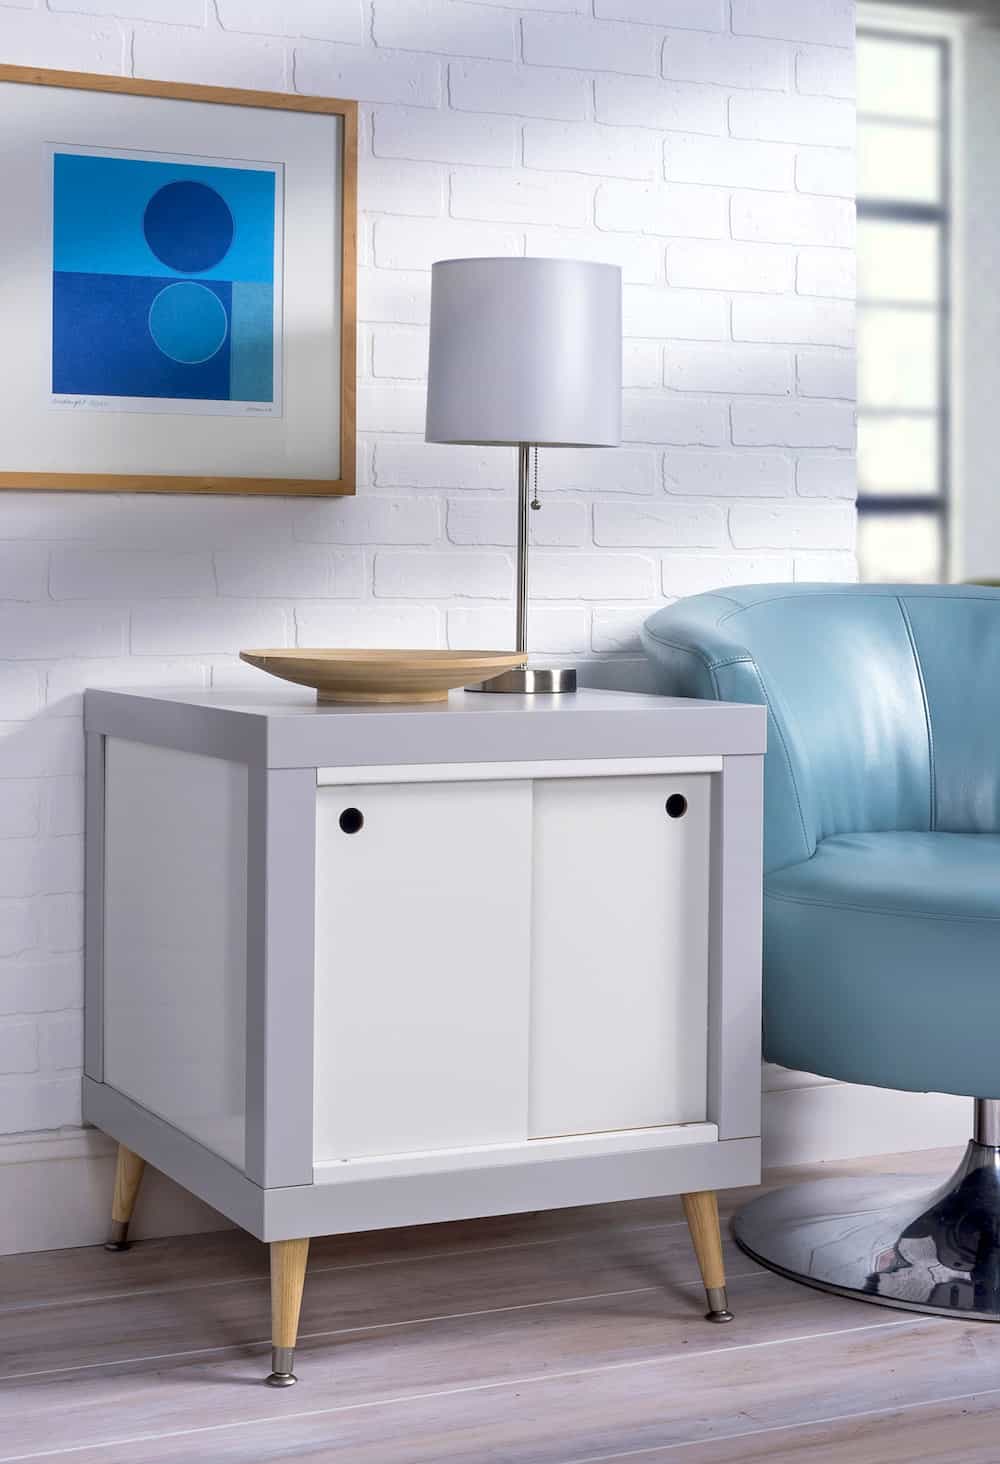 DIY End Table Made with Two IKEA Lack Tables for Under $60